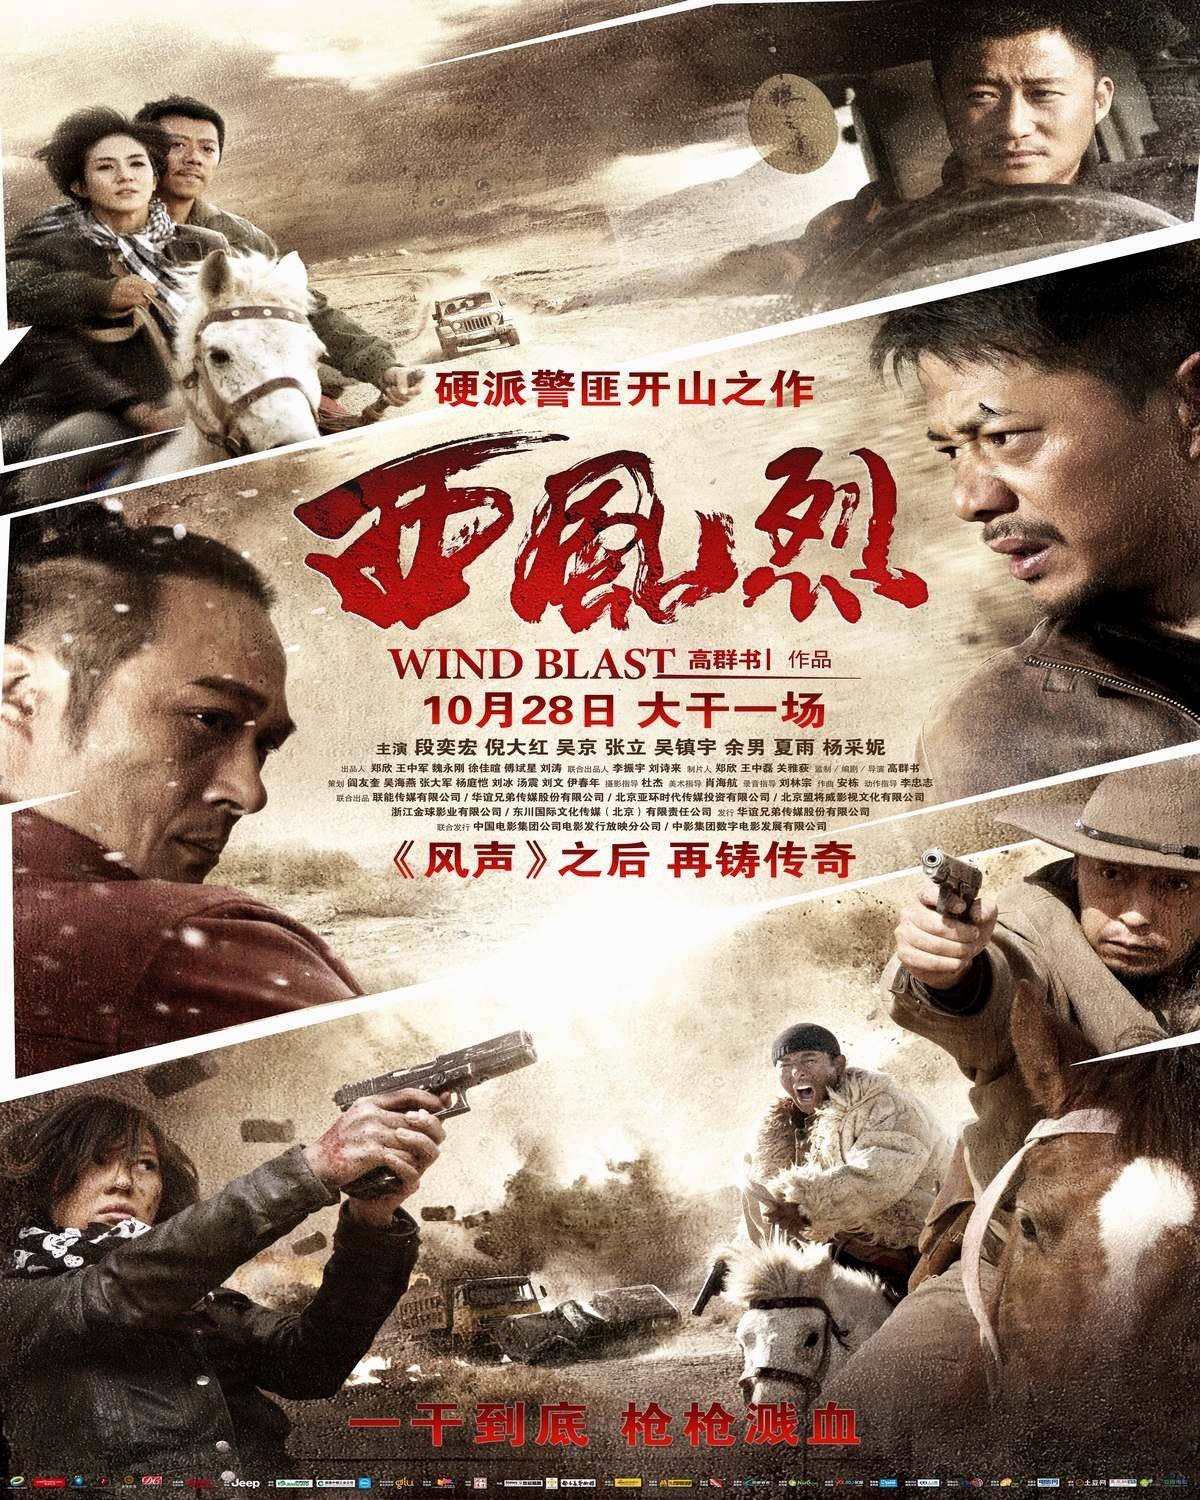 Extra Large Movie Poster Image for Xi Feng Lie (#6 of 6)